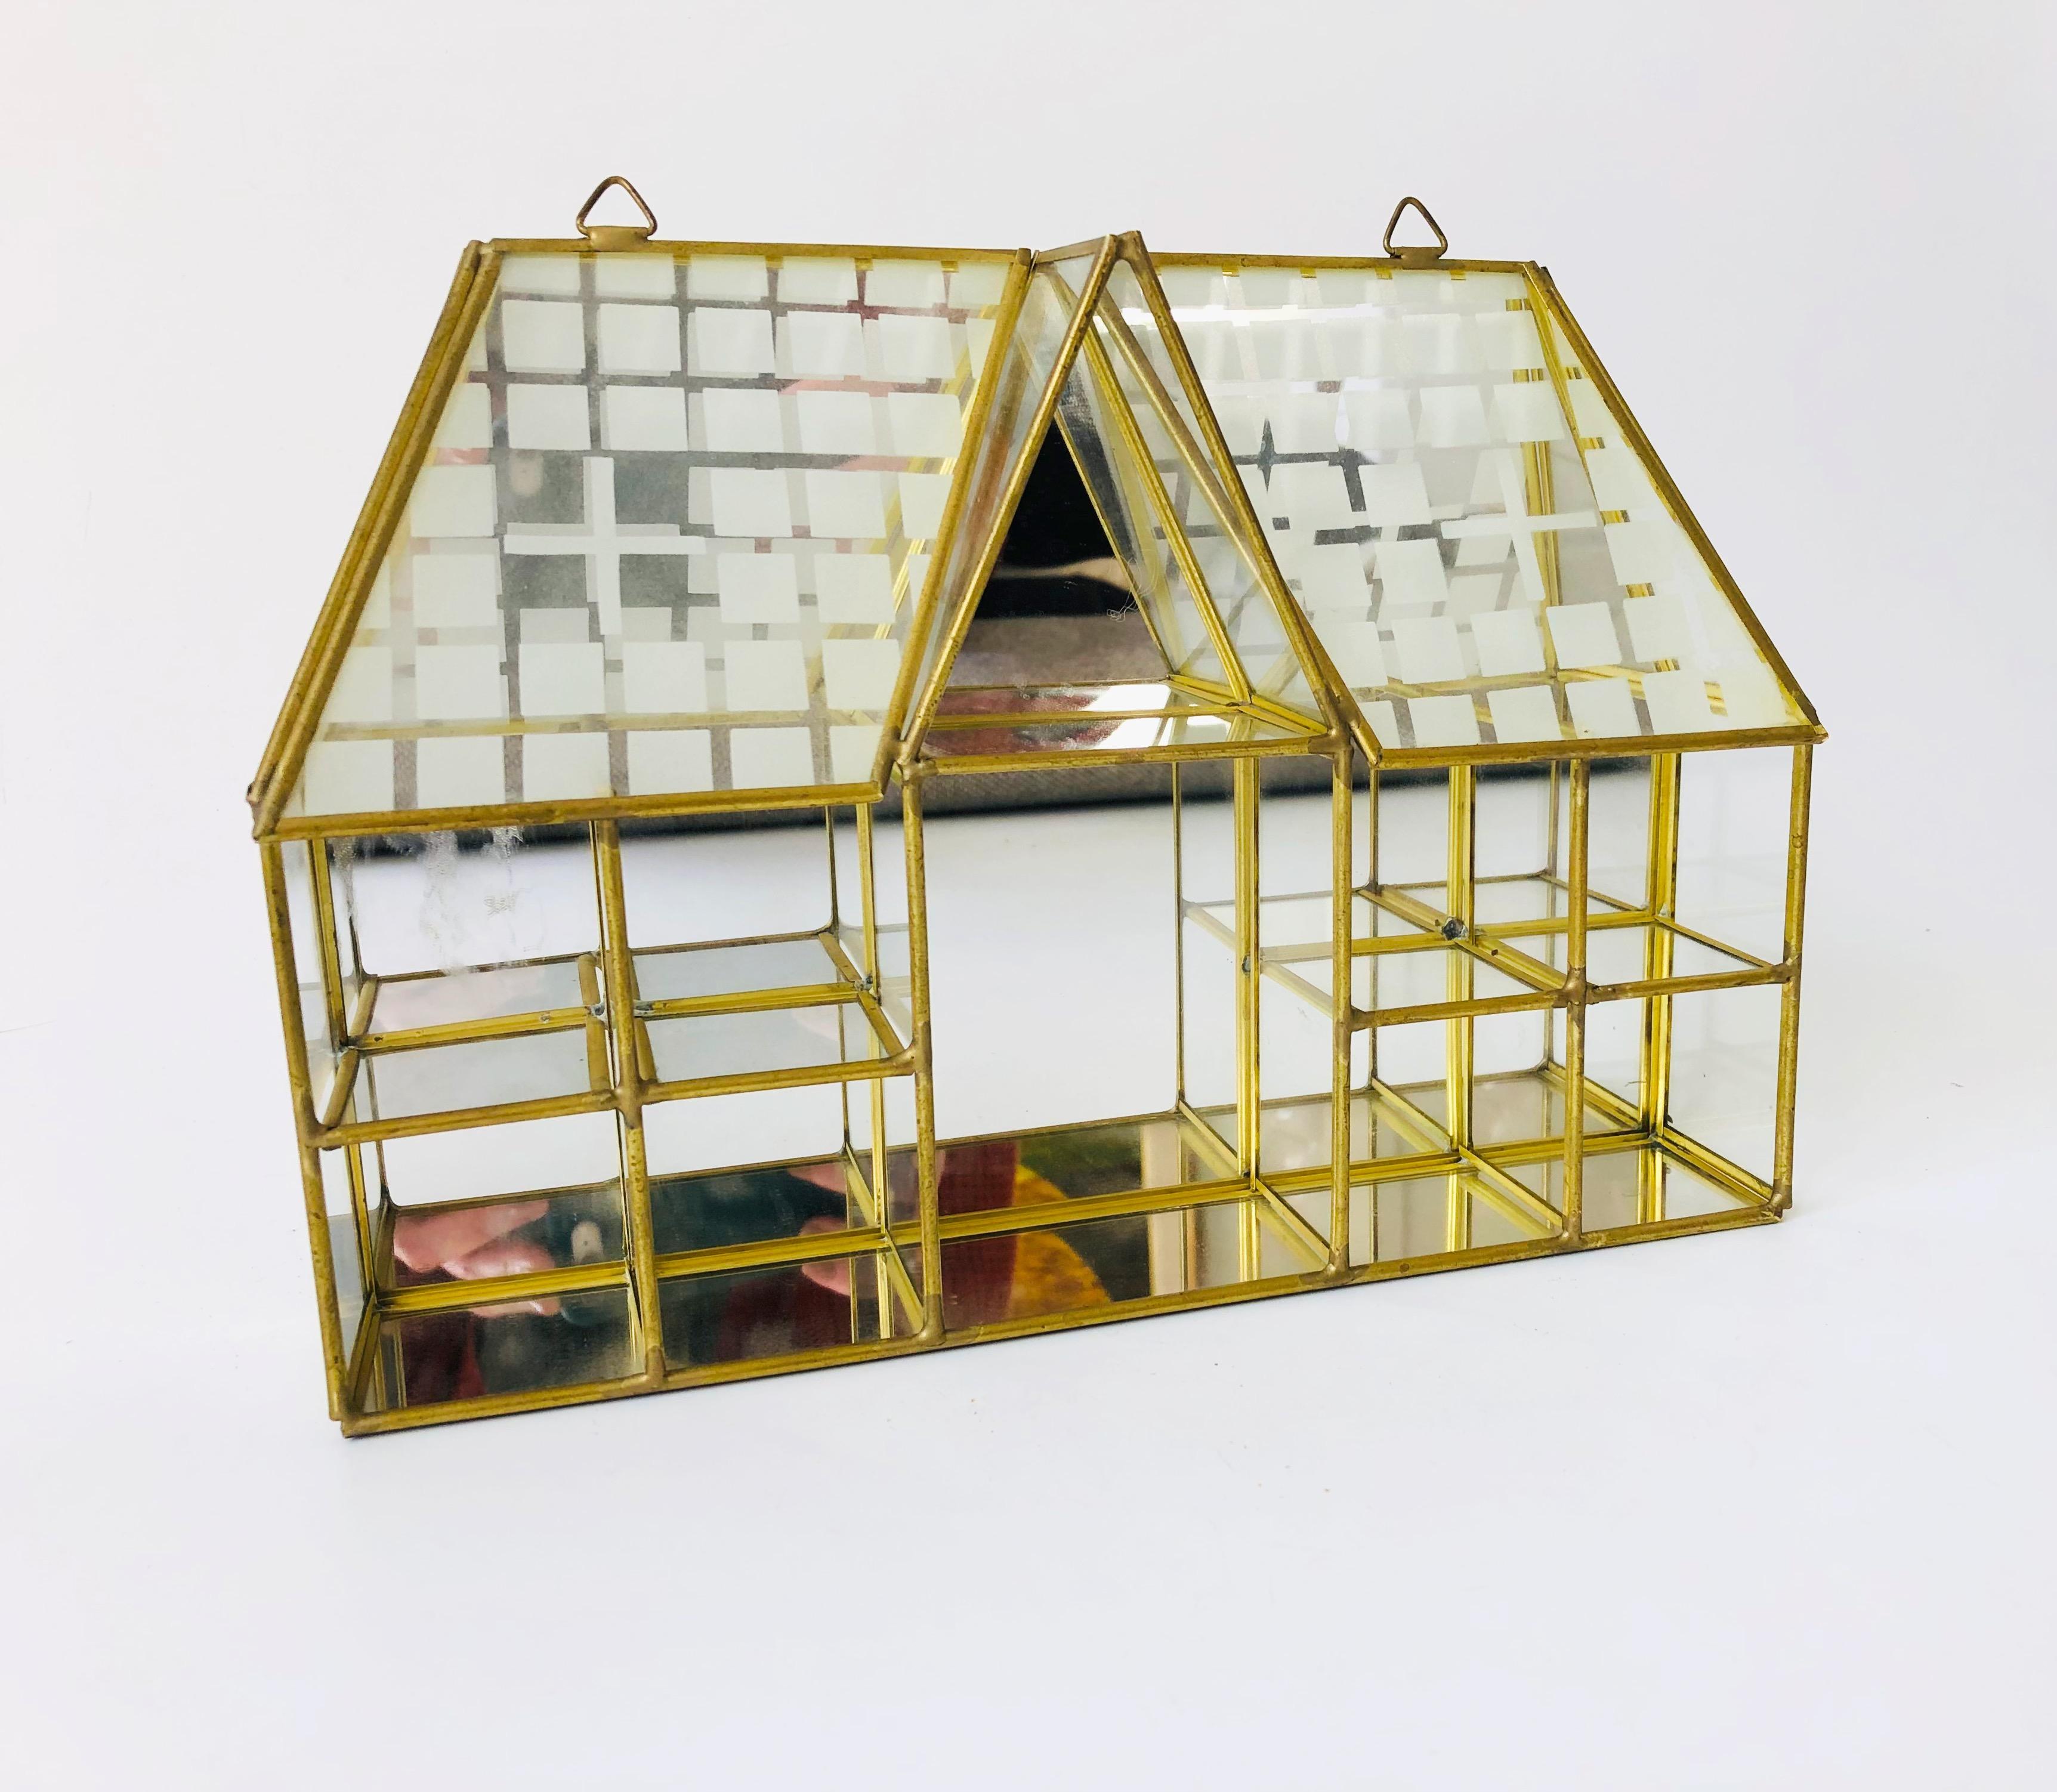 An adorable brass curio display in the shape of a house. 10 compartments of glass shelves with a mirrored back. Whimsical detailing with frosted glass shingles and windows at the top. Ready to hang by 2 hangers at the top of the shelf.